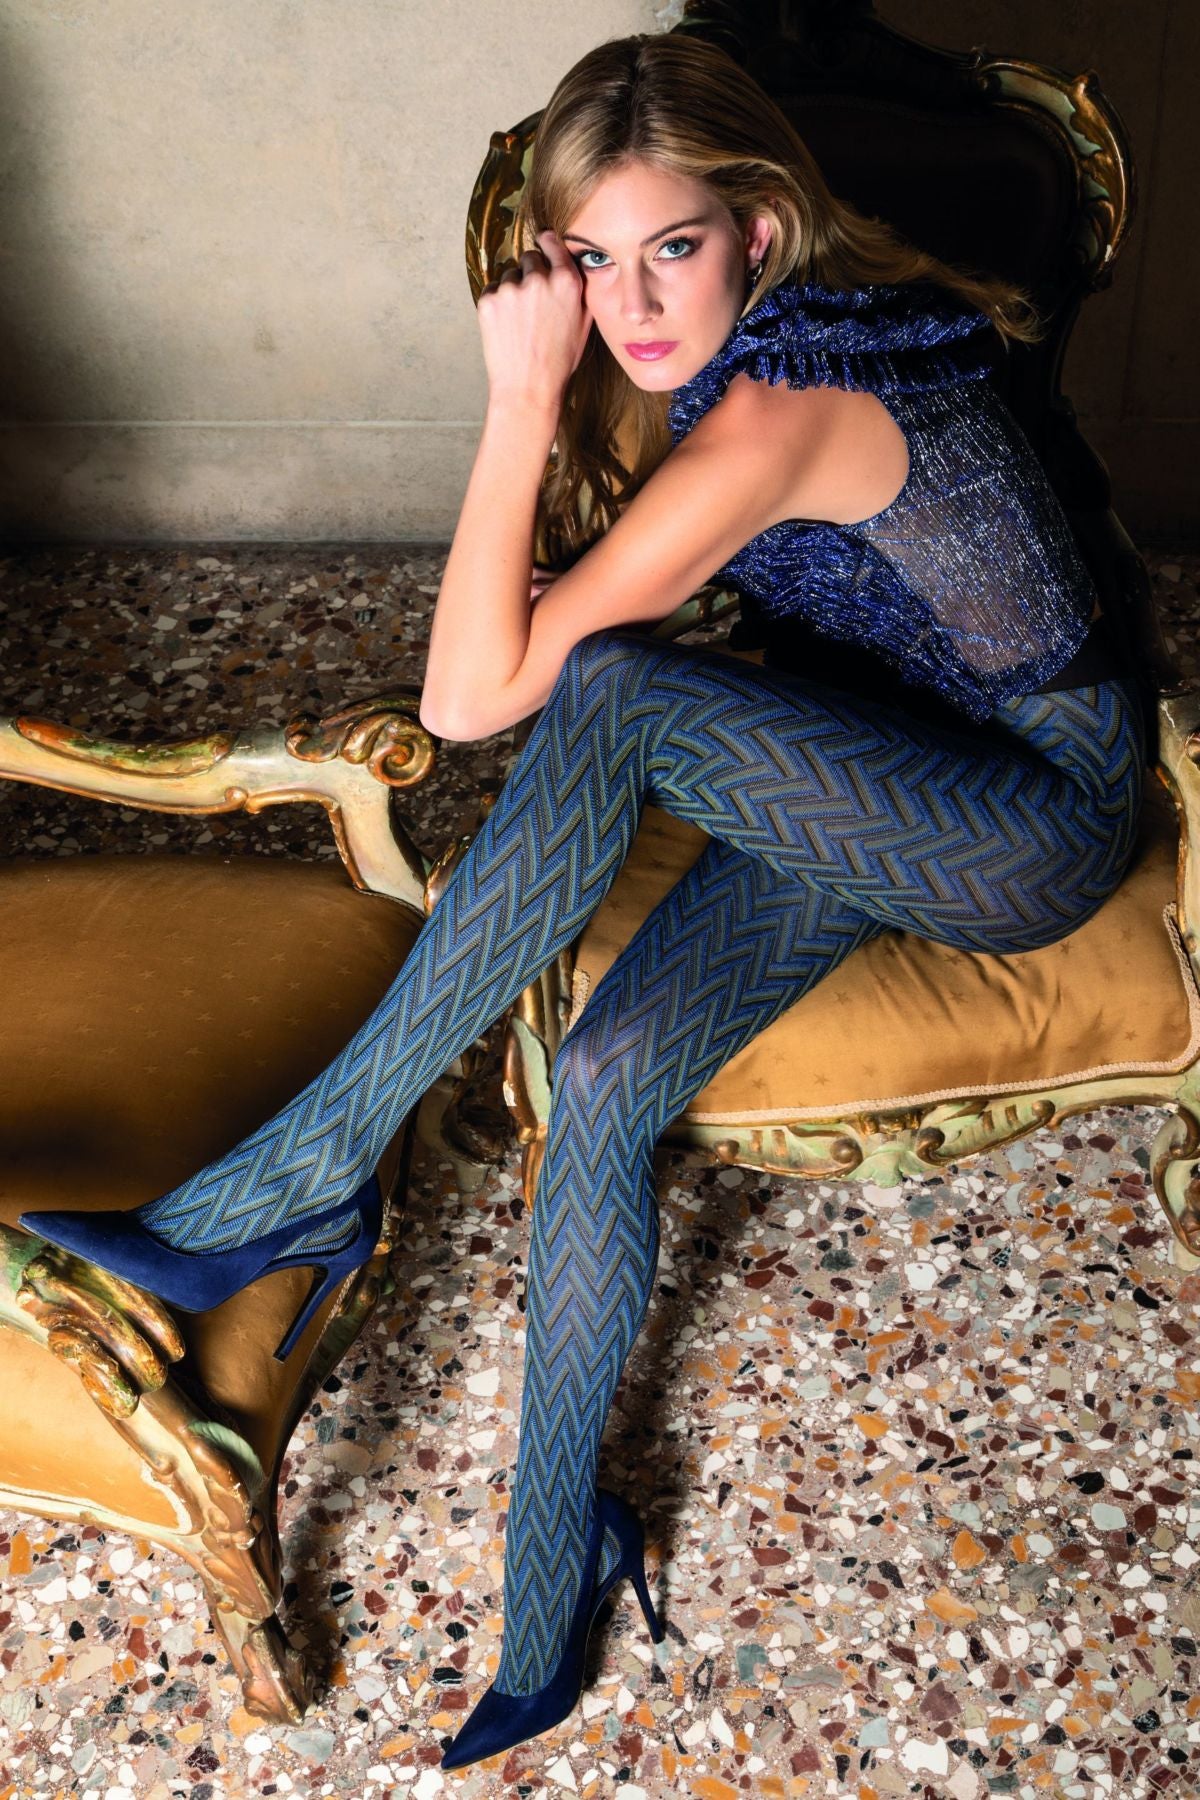 Trasparenze Cerbero Collant - Matte opaque fashion tights a woven zig-zag herringbone style pattern. Available of blue/mustard and brown/beige/tan